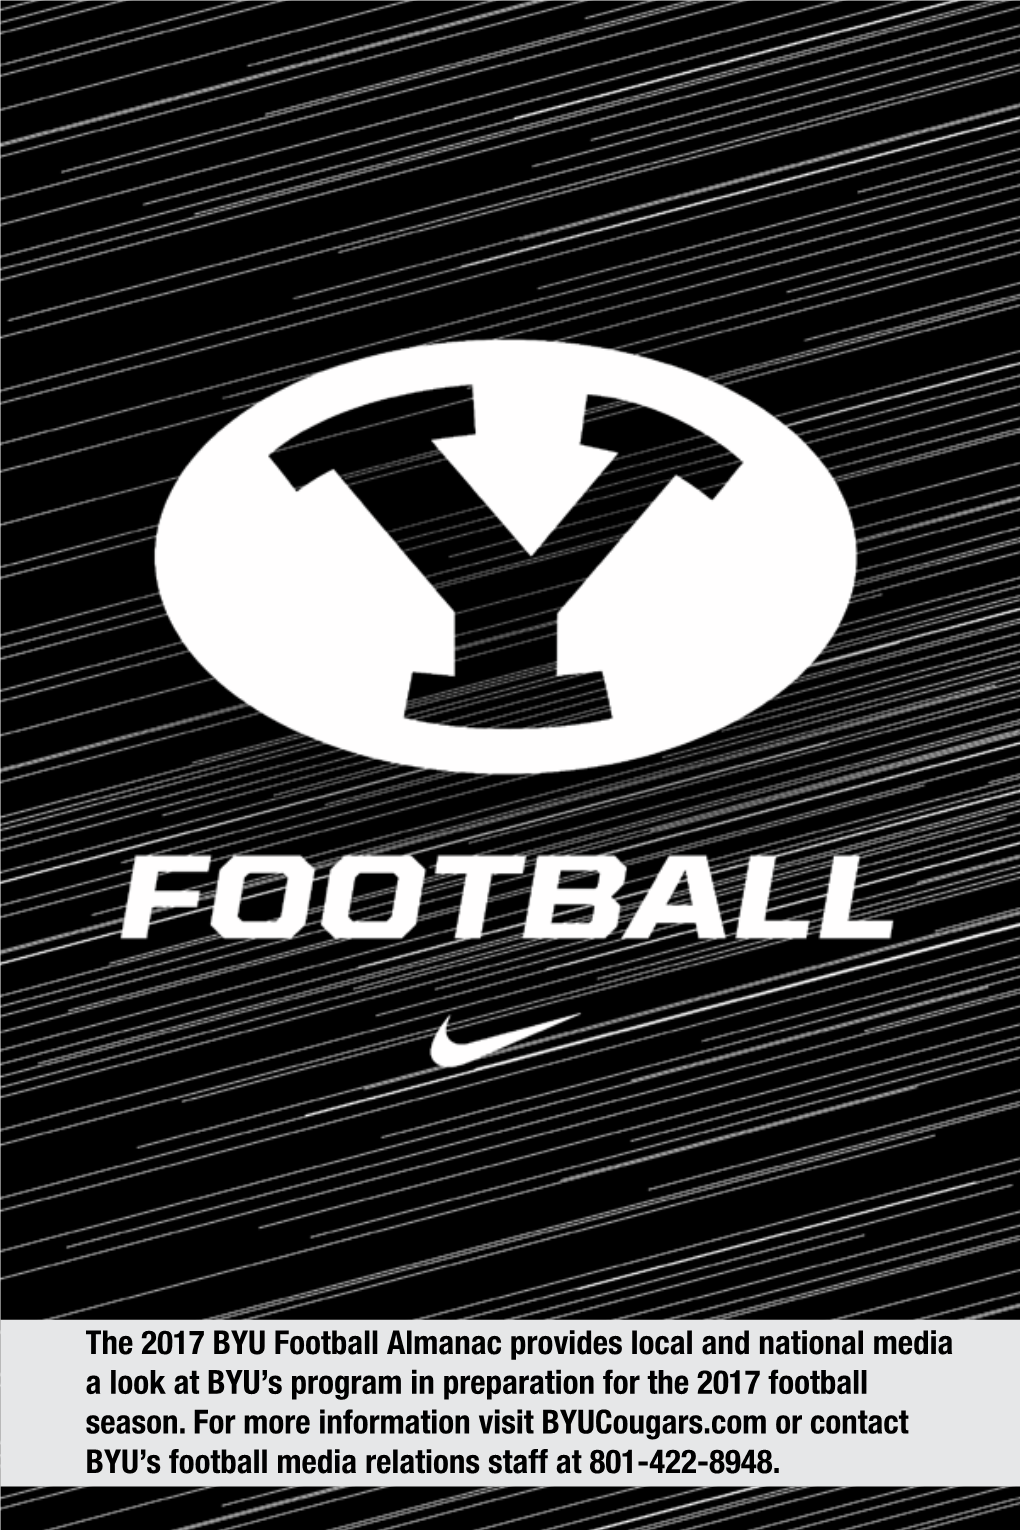 The 2017 BYU Football Almanac Provides Local and National Media a Look at BYU’S Program in Preparation for the 2017 Football Season